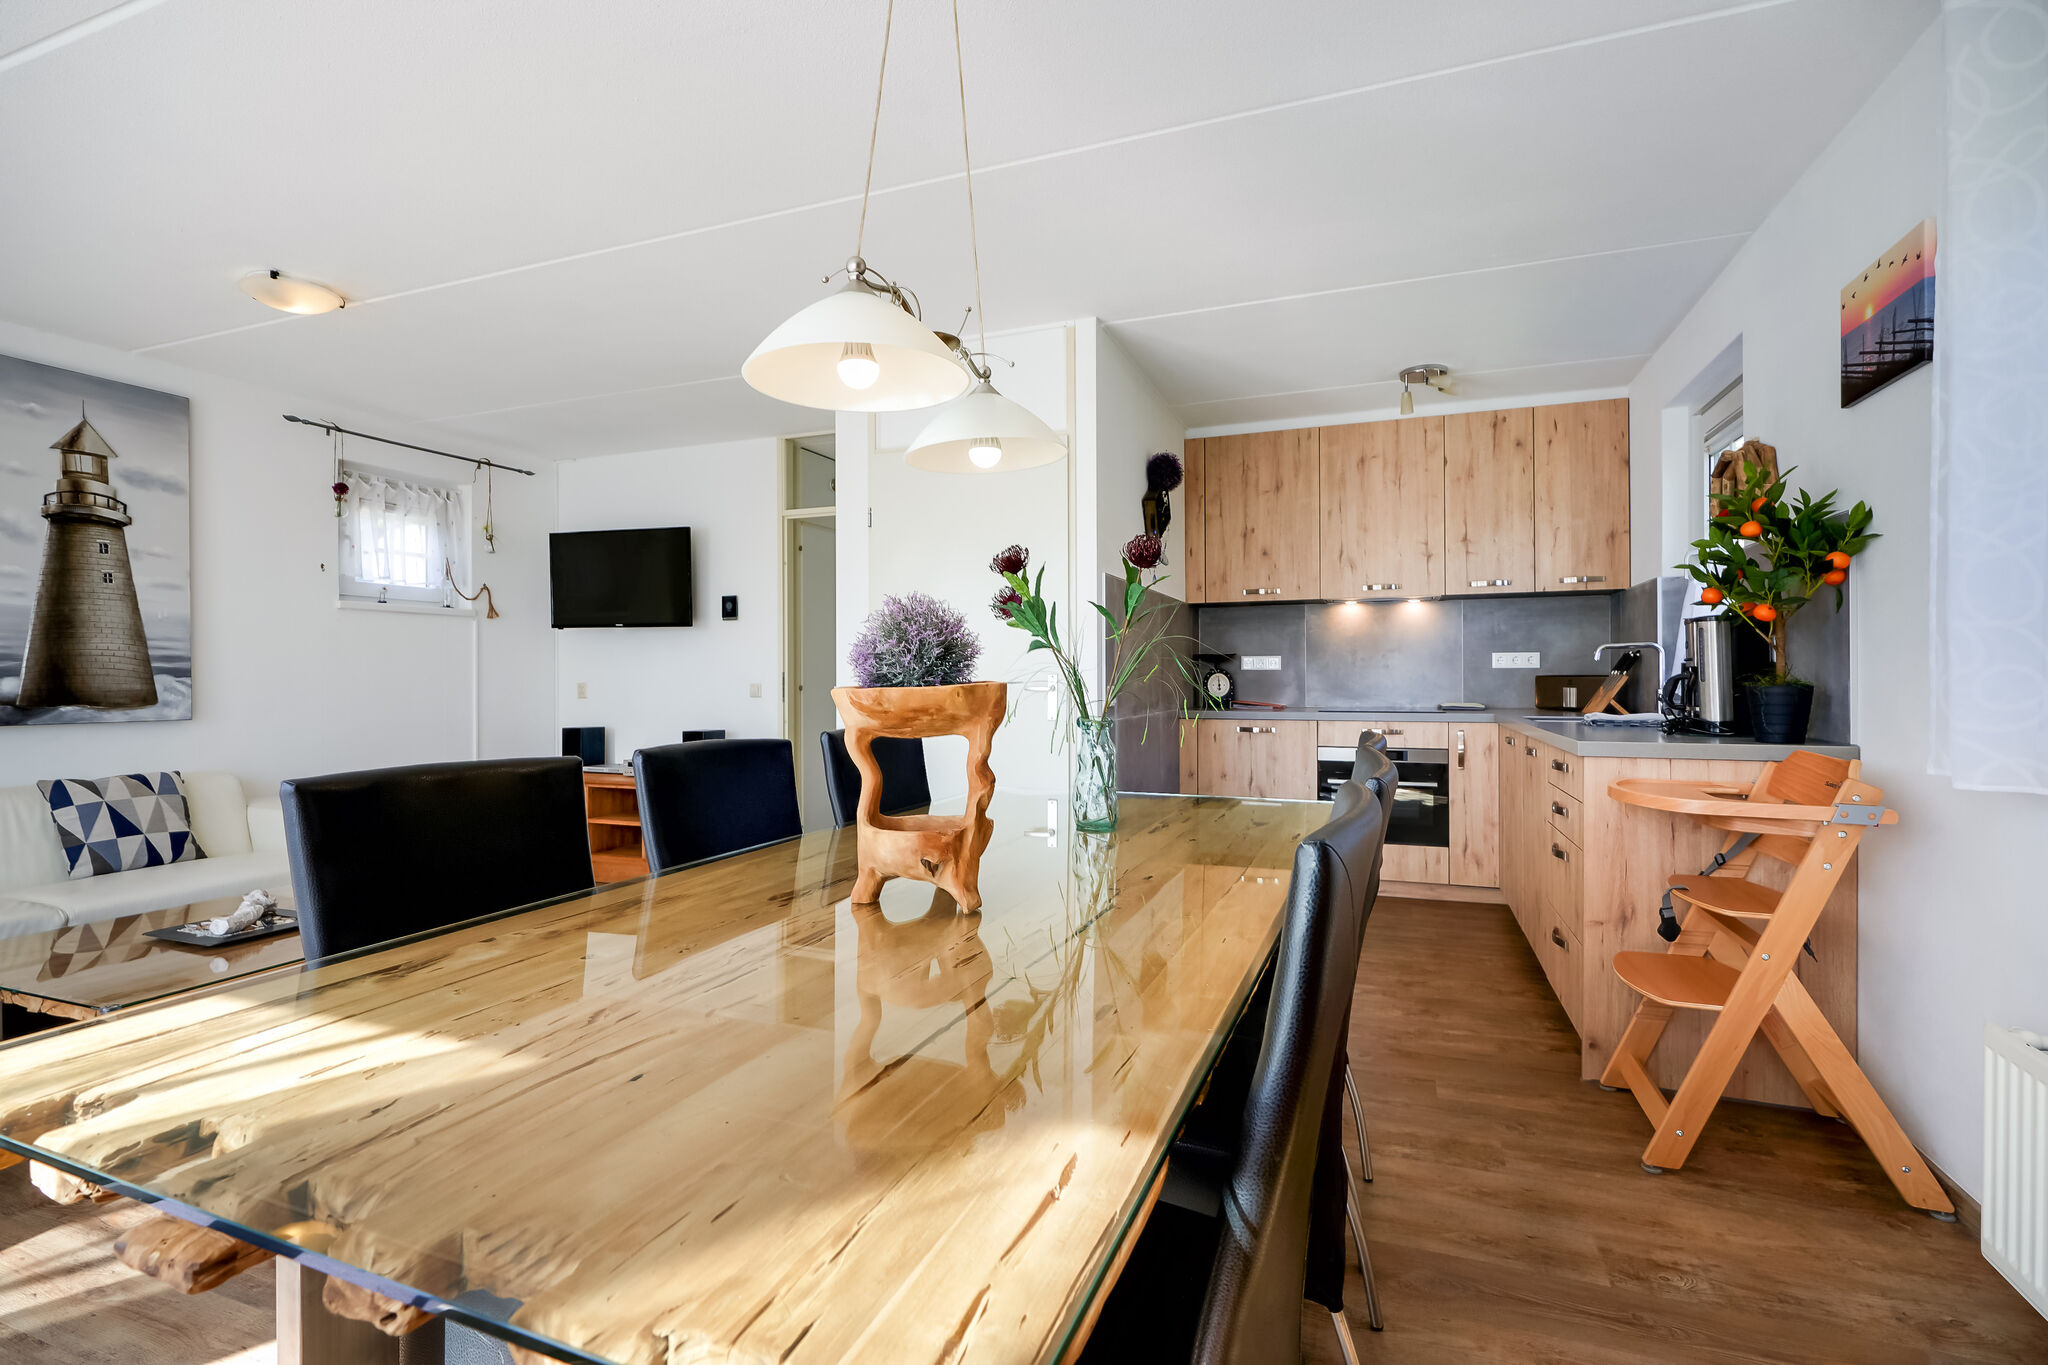 Detached holiday home for 6 people close to the Veerse Meer and marina